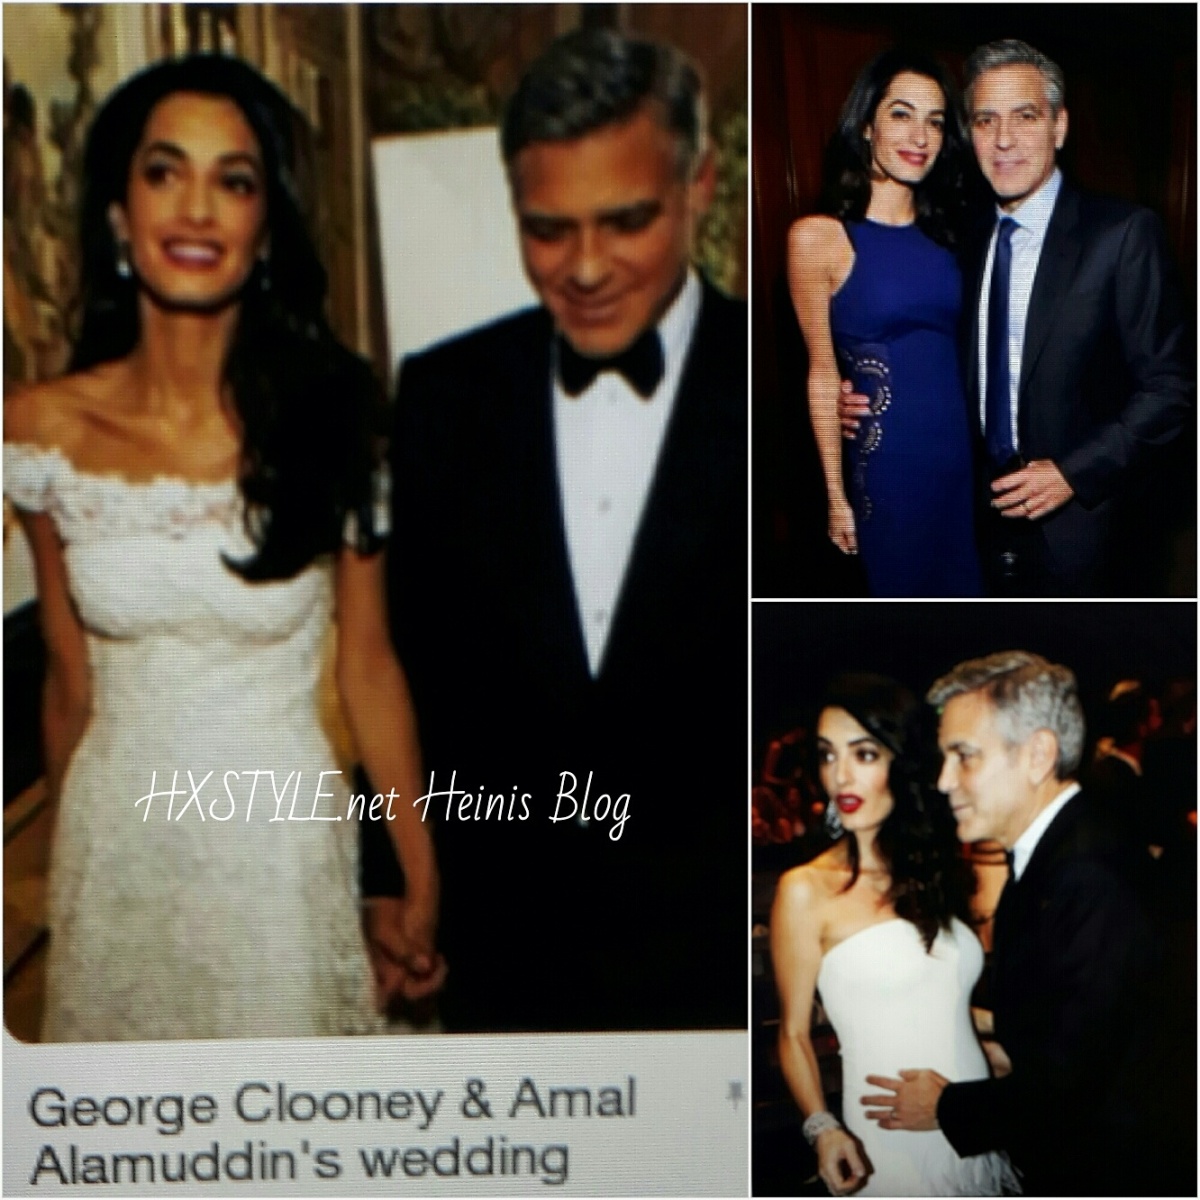 VOGUE NEWS&TRENDS. FAMOUS PEOPLES&FAMILY. WORLD FAMOUS MOVIE STAR, USA… GEORGE CLOONEY and AMAL CLOONEY. FASHION&LUXURY Life style, Family 2014…18.10.2017. COVER 2018. Favourite HXSTYLE.net HEINIS